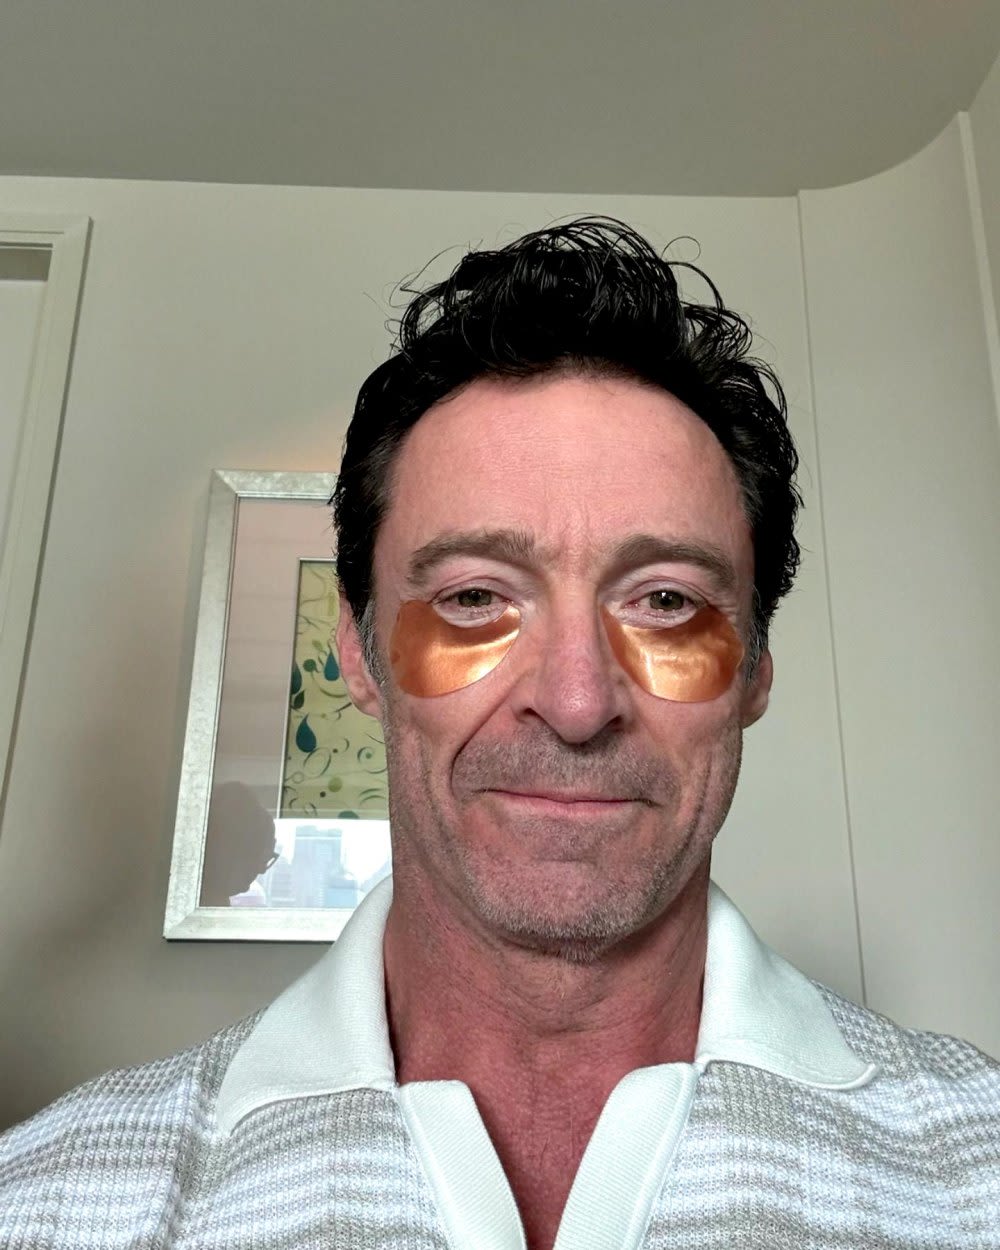 Hugh Jackman Practices Self-Care With Gold Eye Masks: ‘This Is 55’